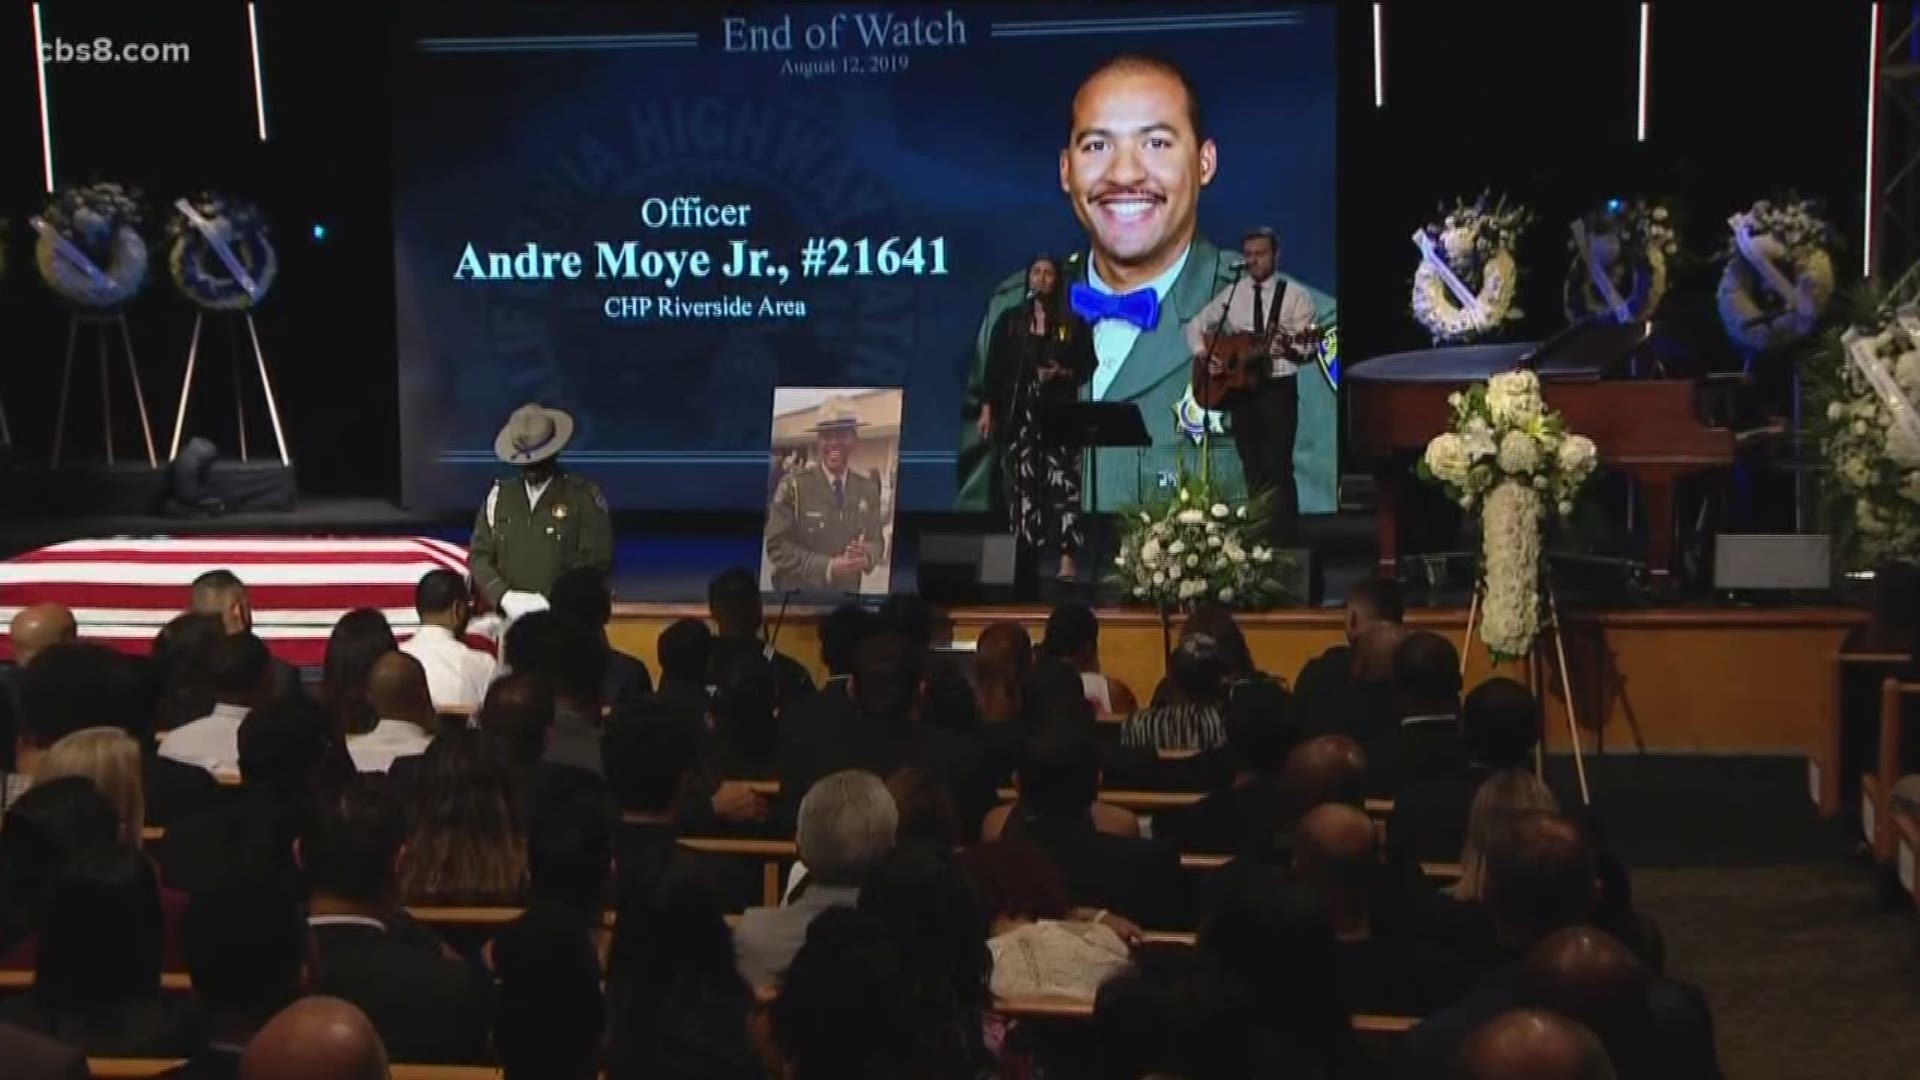 The public was invited to attend the service for Andre Moye, Jr. at Harvest Christian Fellowship in Riverside, east of Los Angeles.